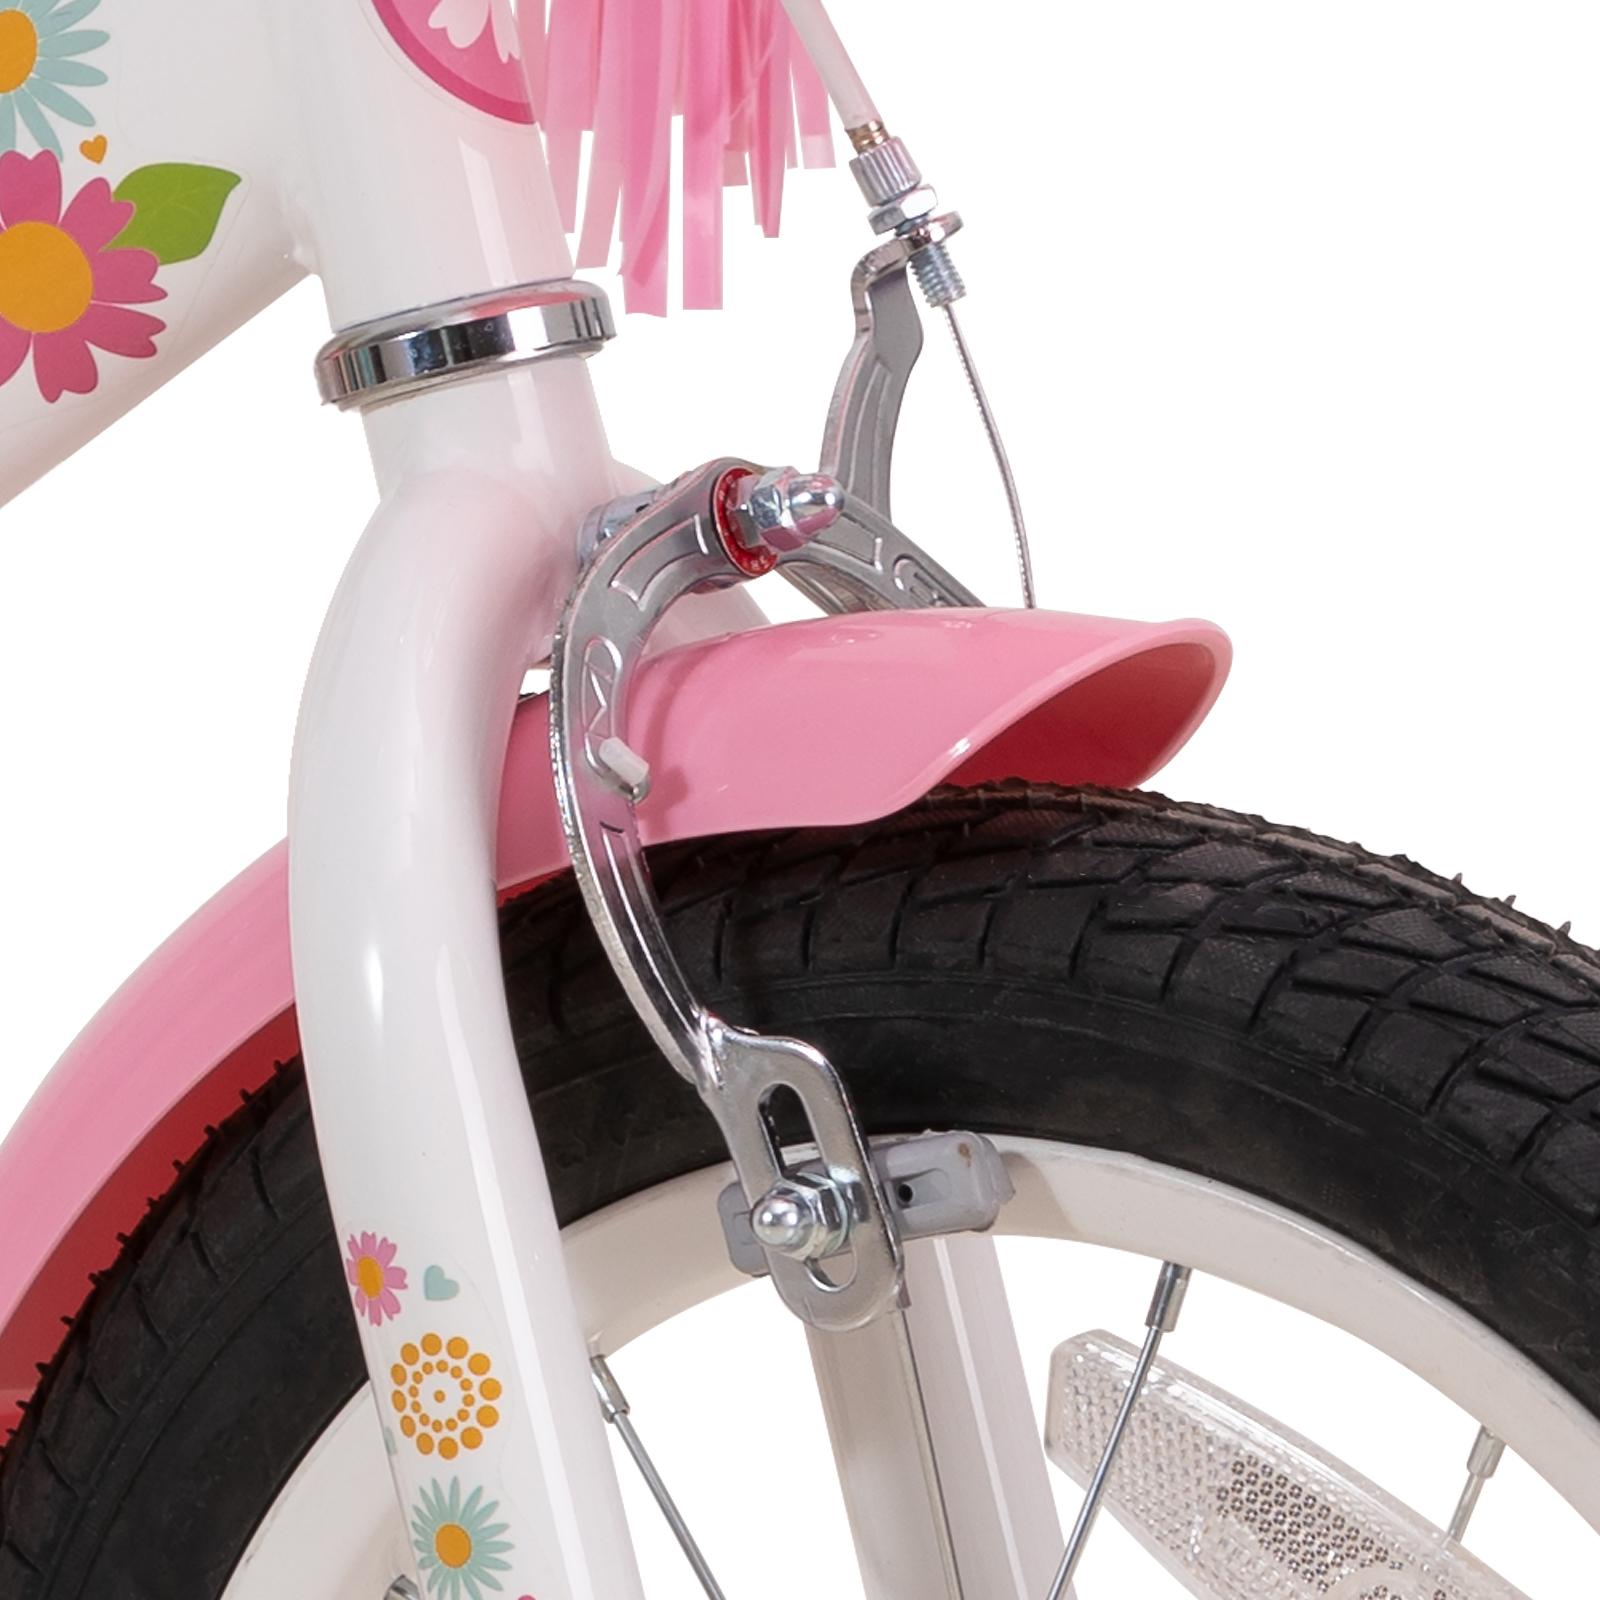 JOYSTAR Little Daisy 12 Inch Kids Bike for 2 3 4 Years Girls with Training Wheels Princess Kids Bicycle with Basket Bike Streamers Toddler Cycle Bikes White - image 4 of 11